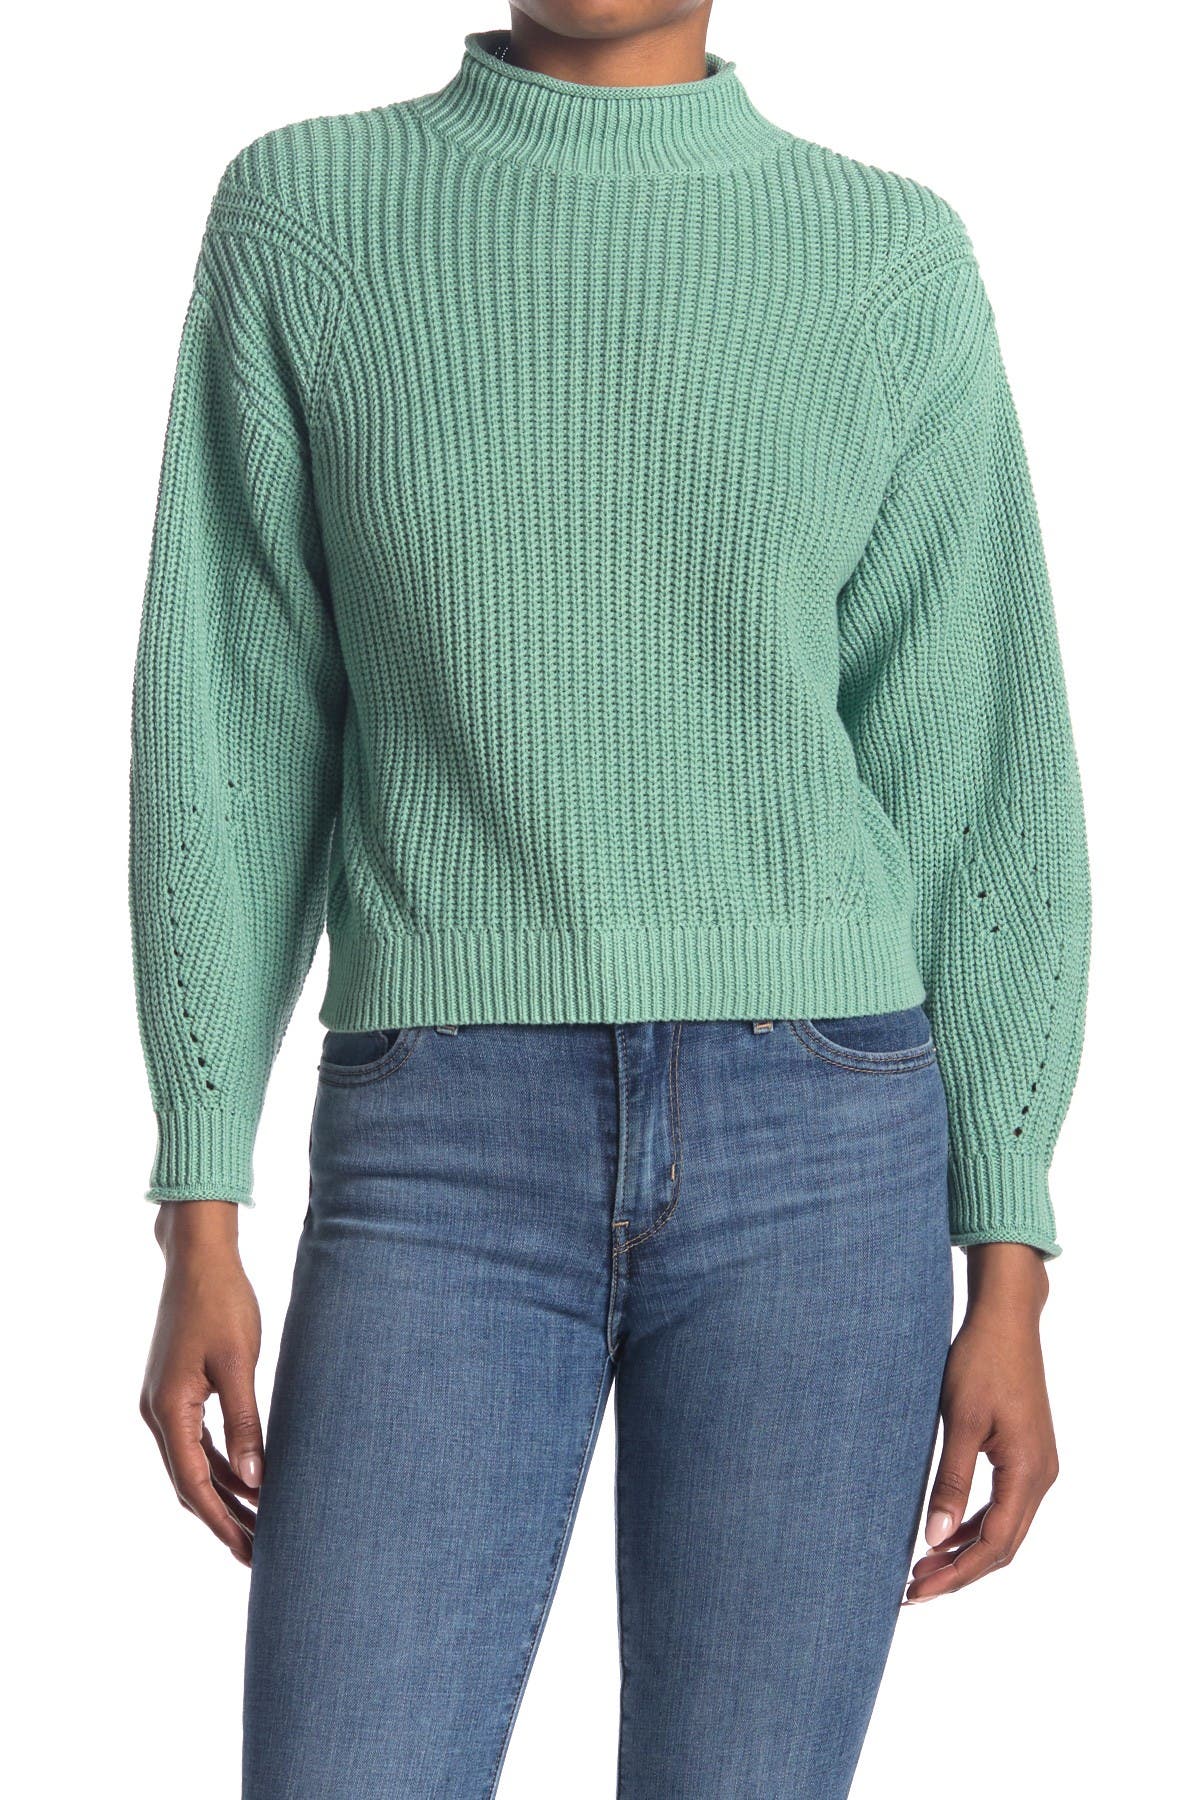 Abound Easy Stitch Ribbed Knit Mock Neck Sweater In Light/pastel Green